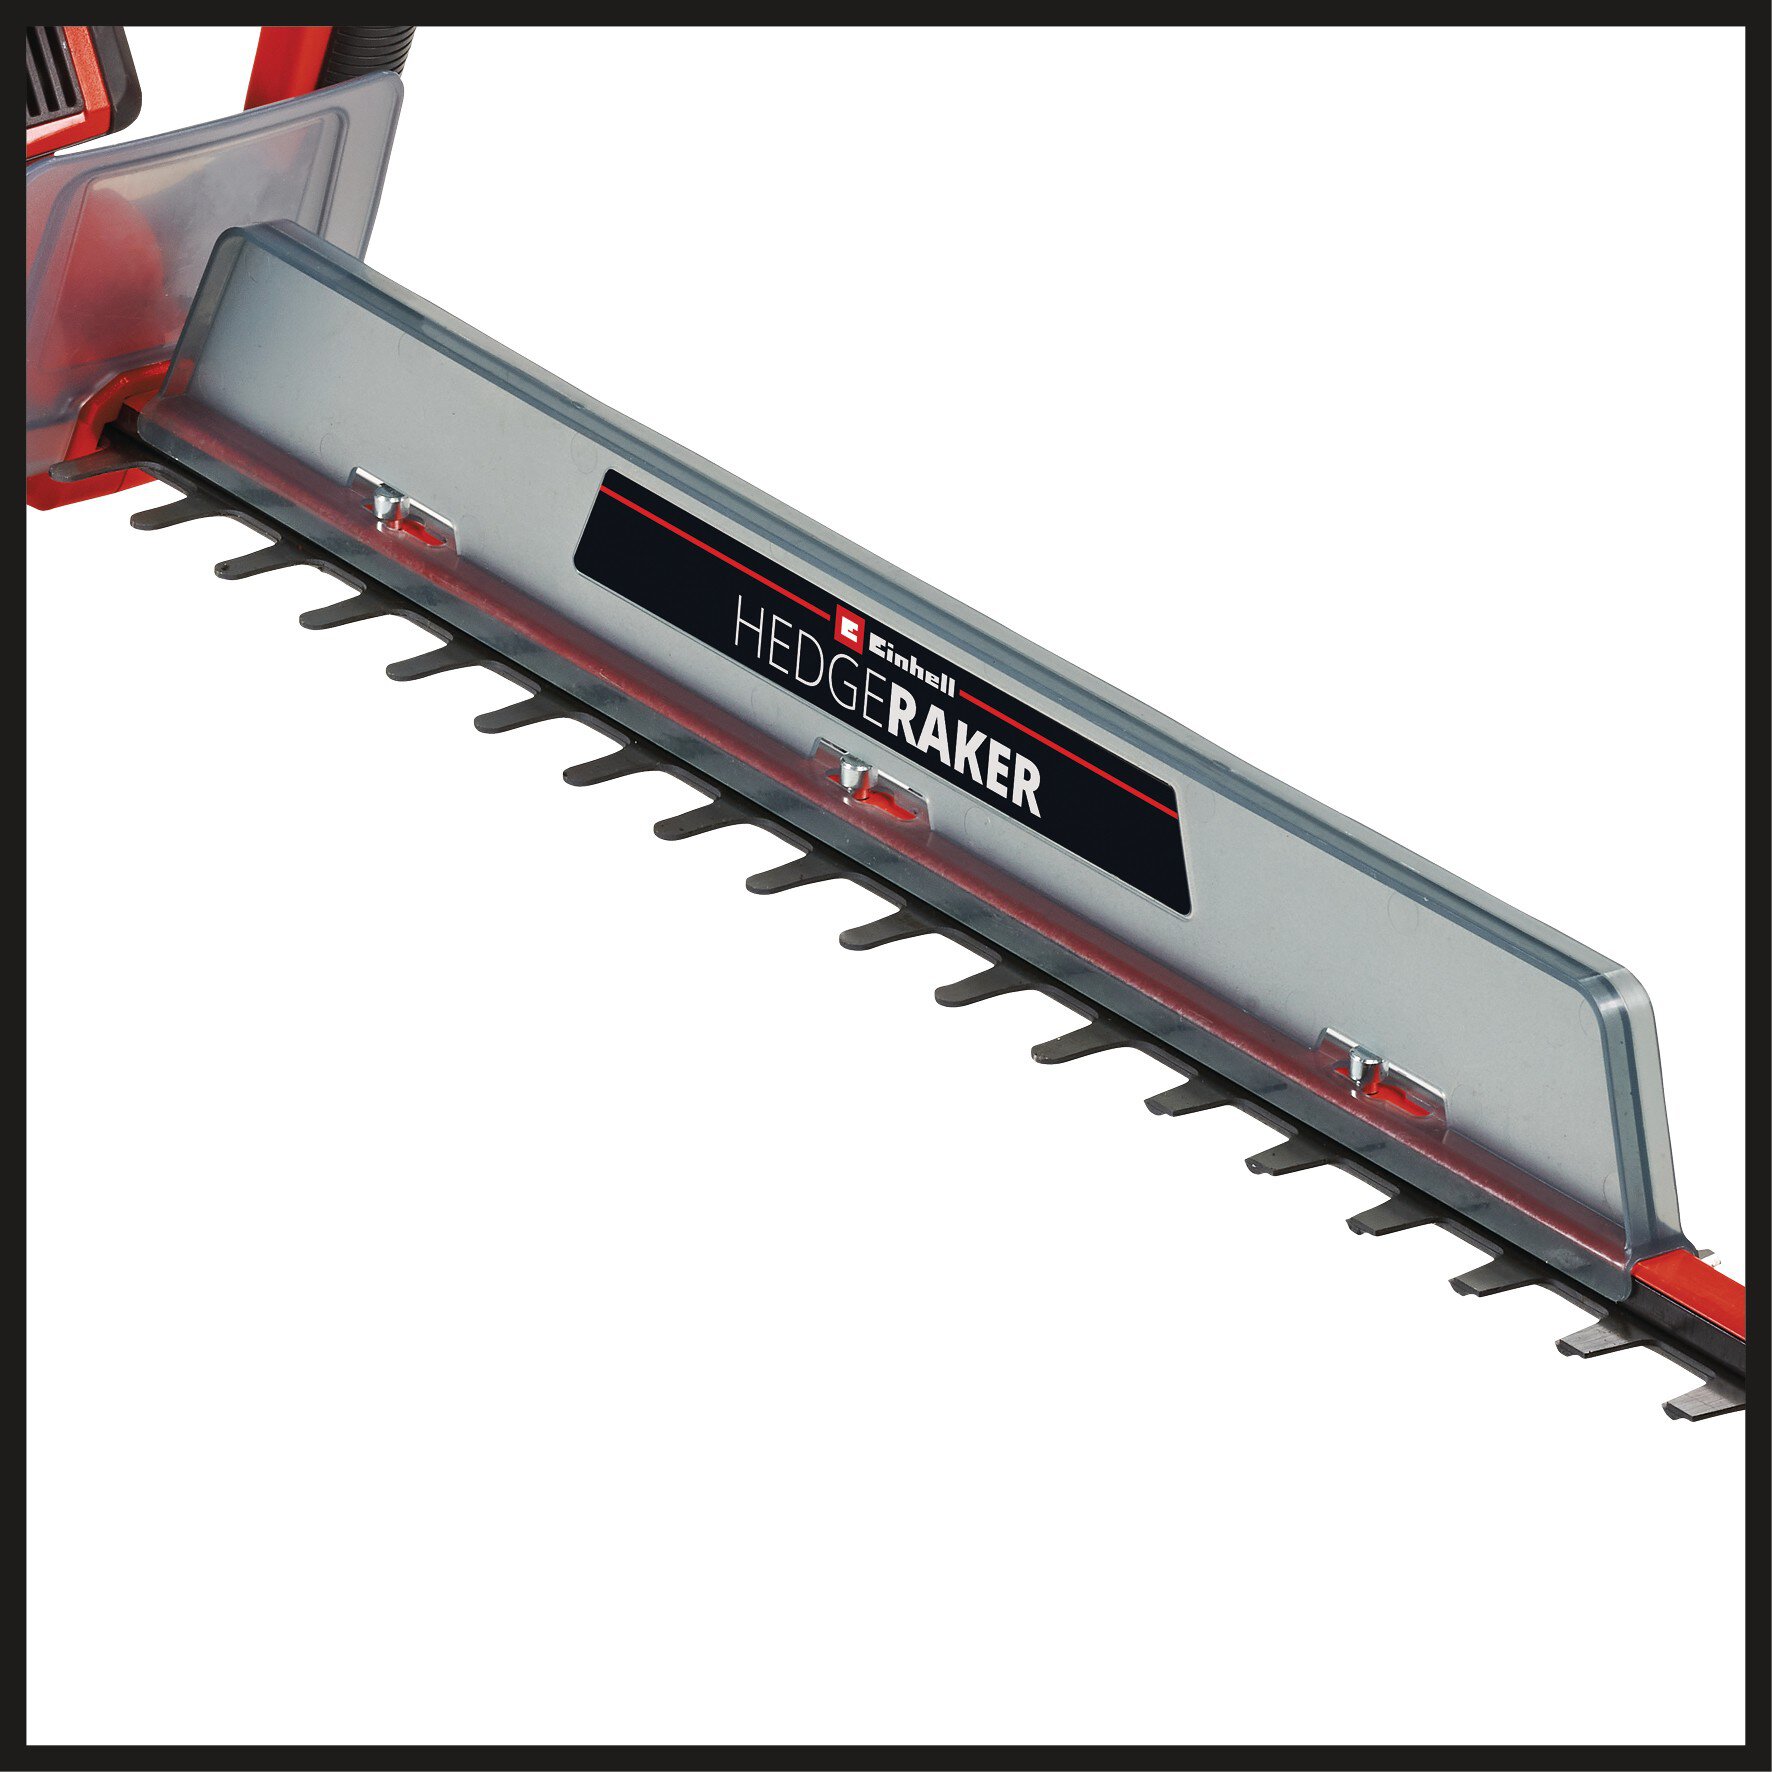 einhell-expert-cordless-hedge-trimmer-3410965-detail_image-002